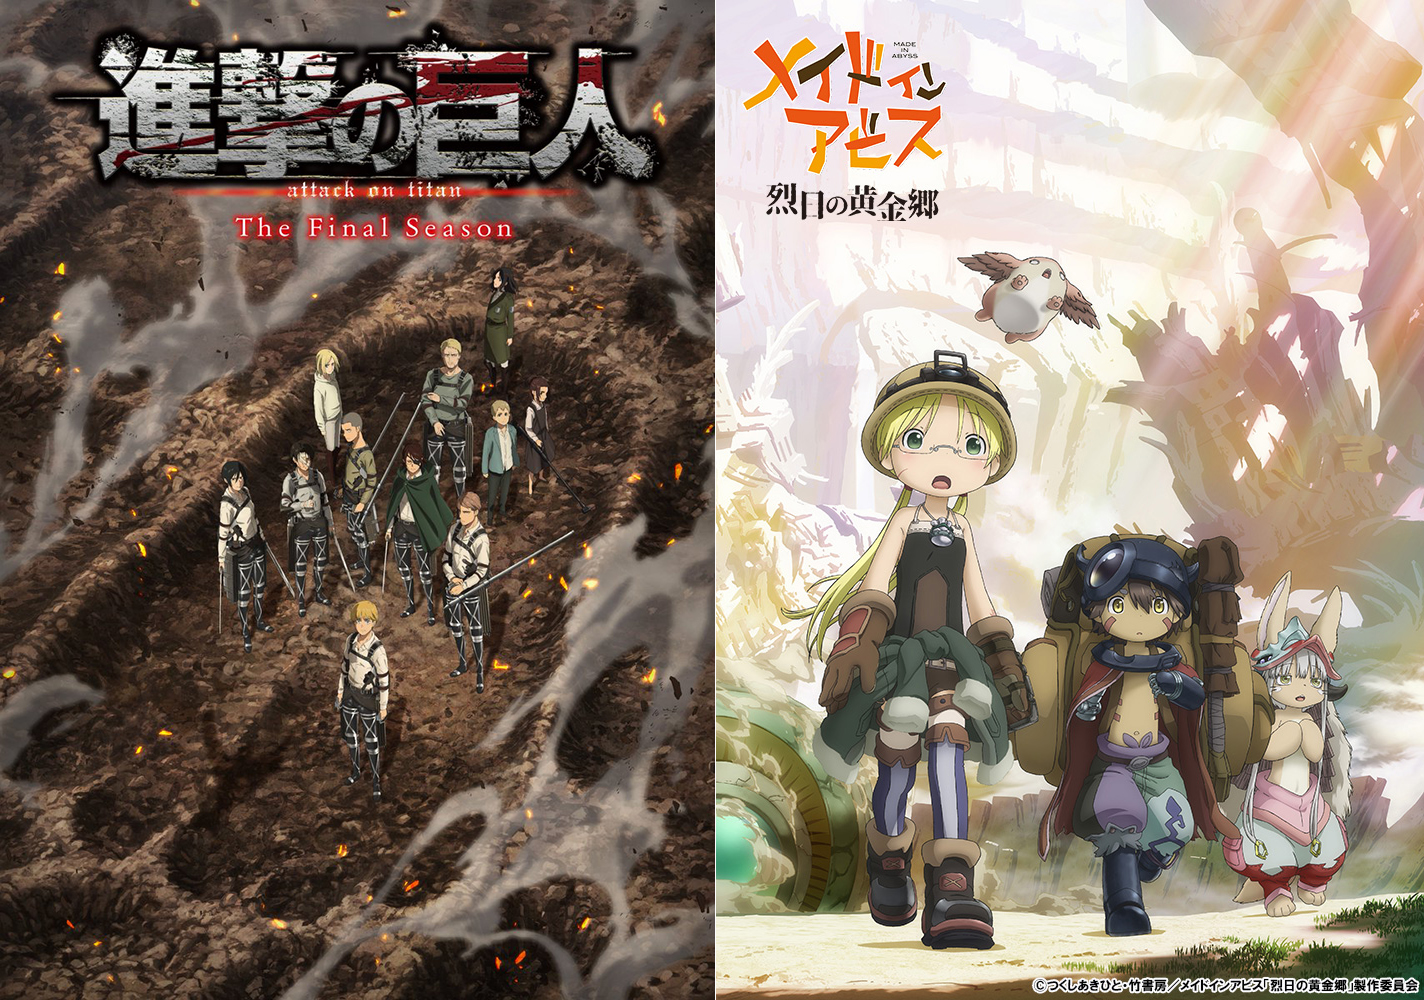 Made in Abyss Season 2 scheduled for July 2022, Attack on Titan: The Final Season Part 3 in 2023